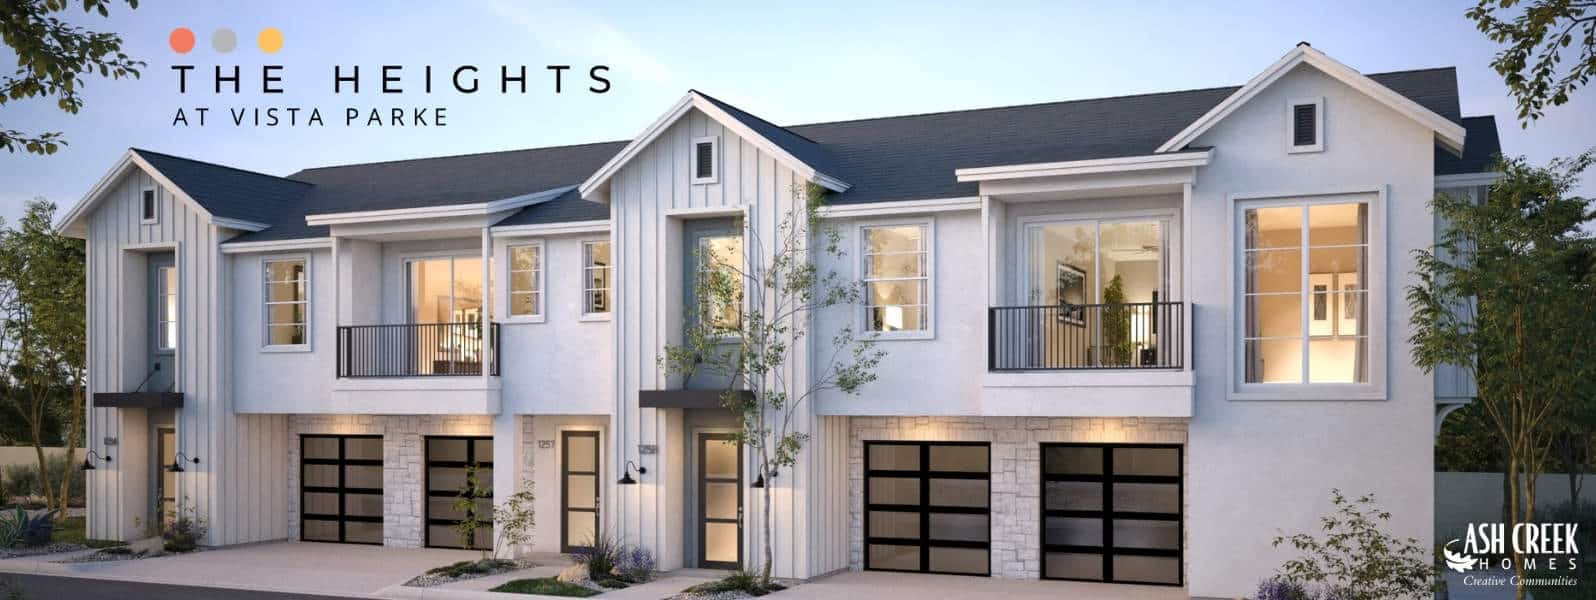 rendering of homes at The Heights at Vista Parke